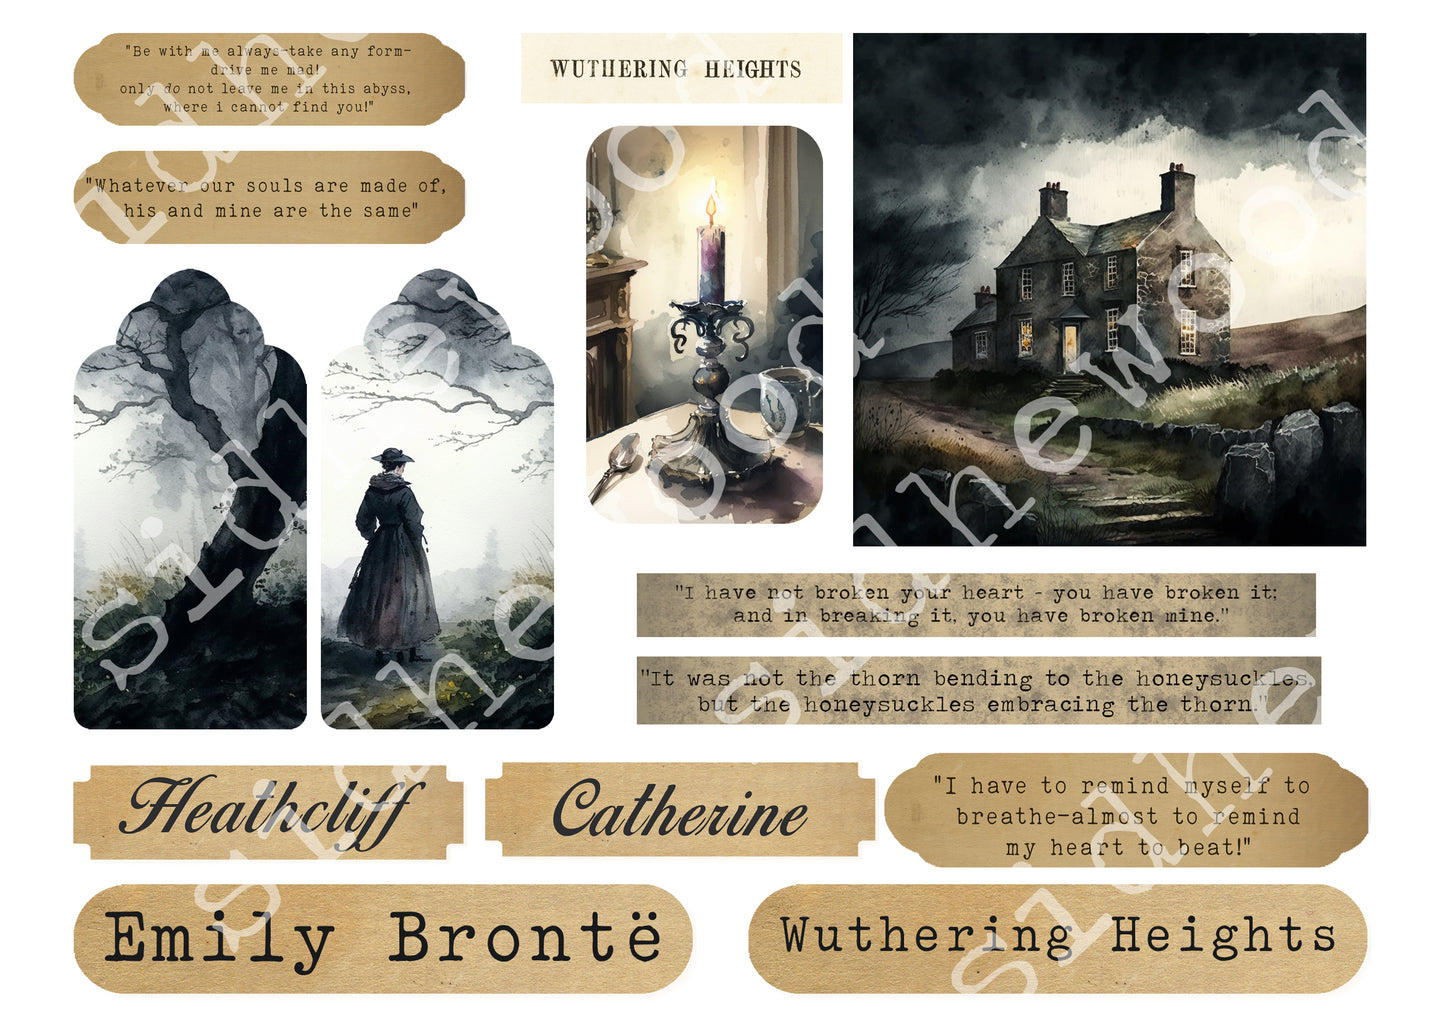 Wuthering Heights Quotes & Images - digital download (printable file)